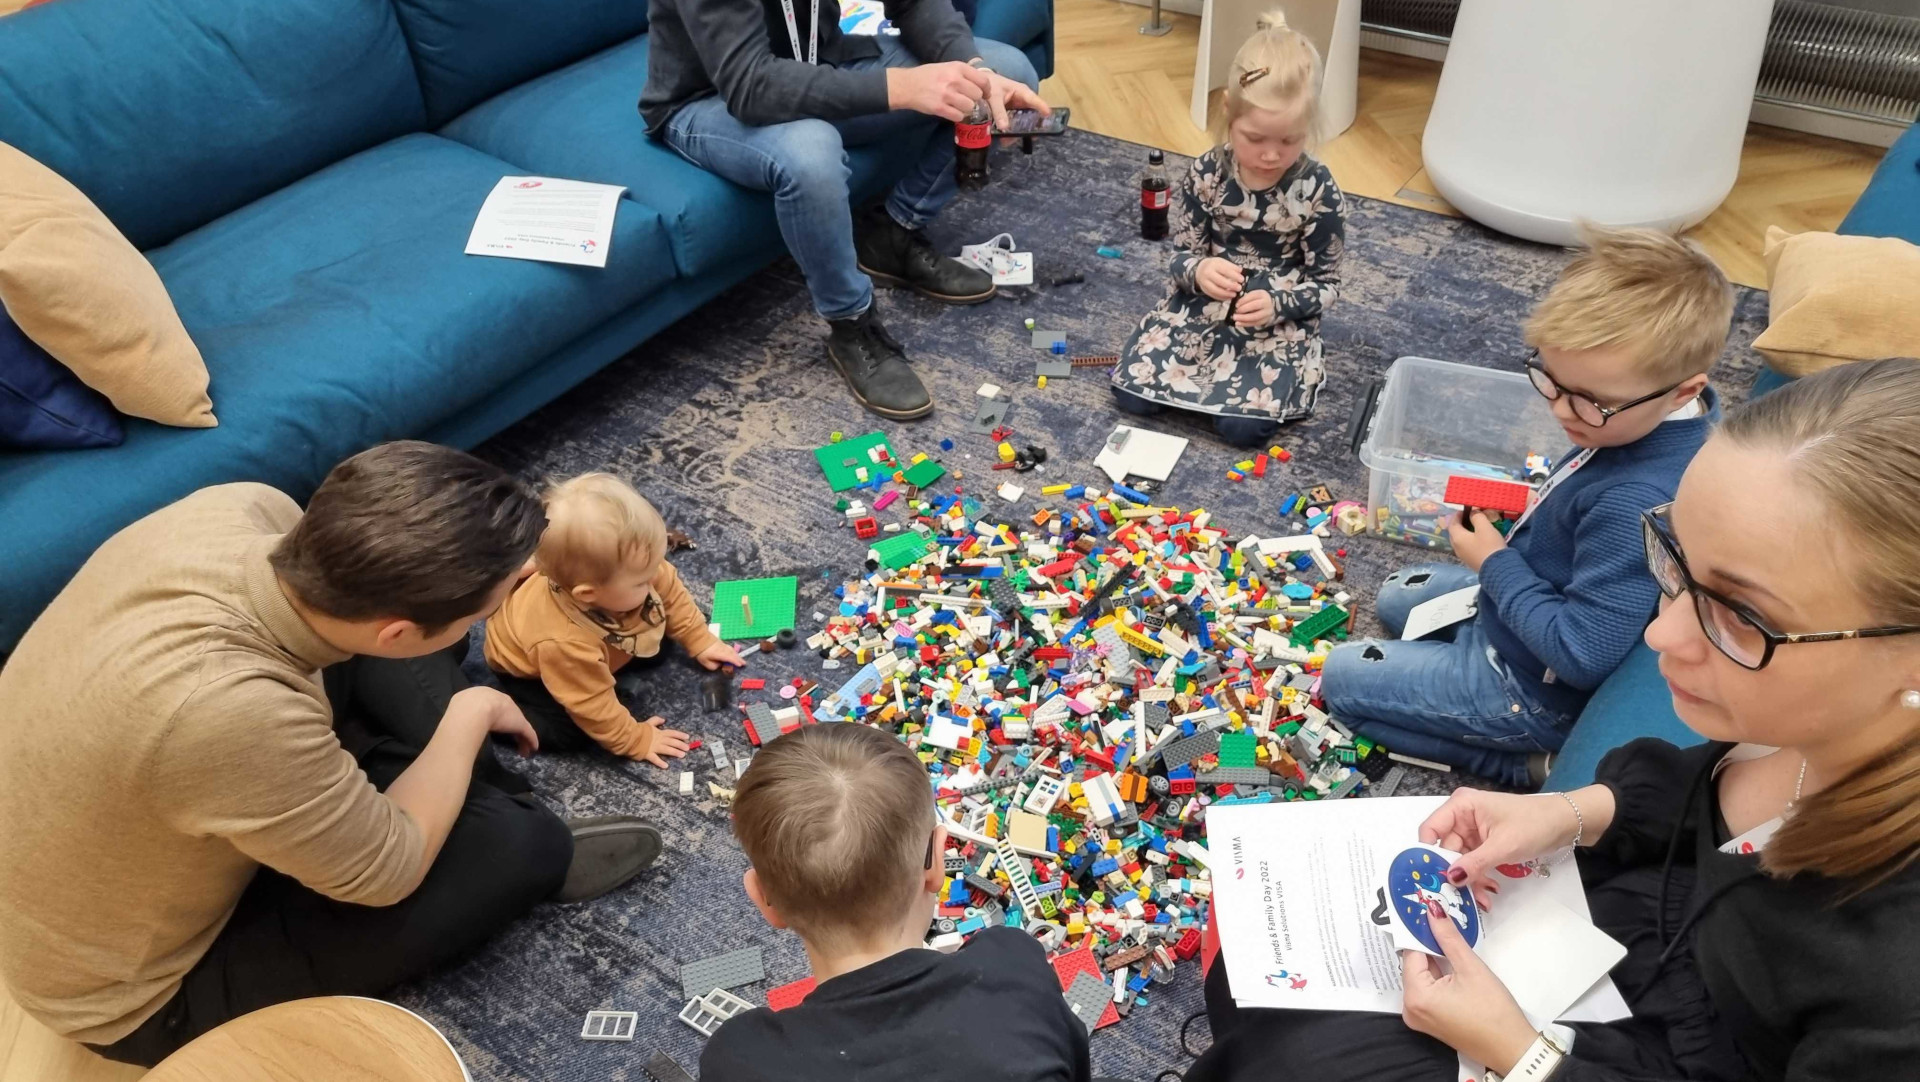 Lego building at Tripla office